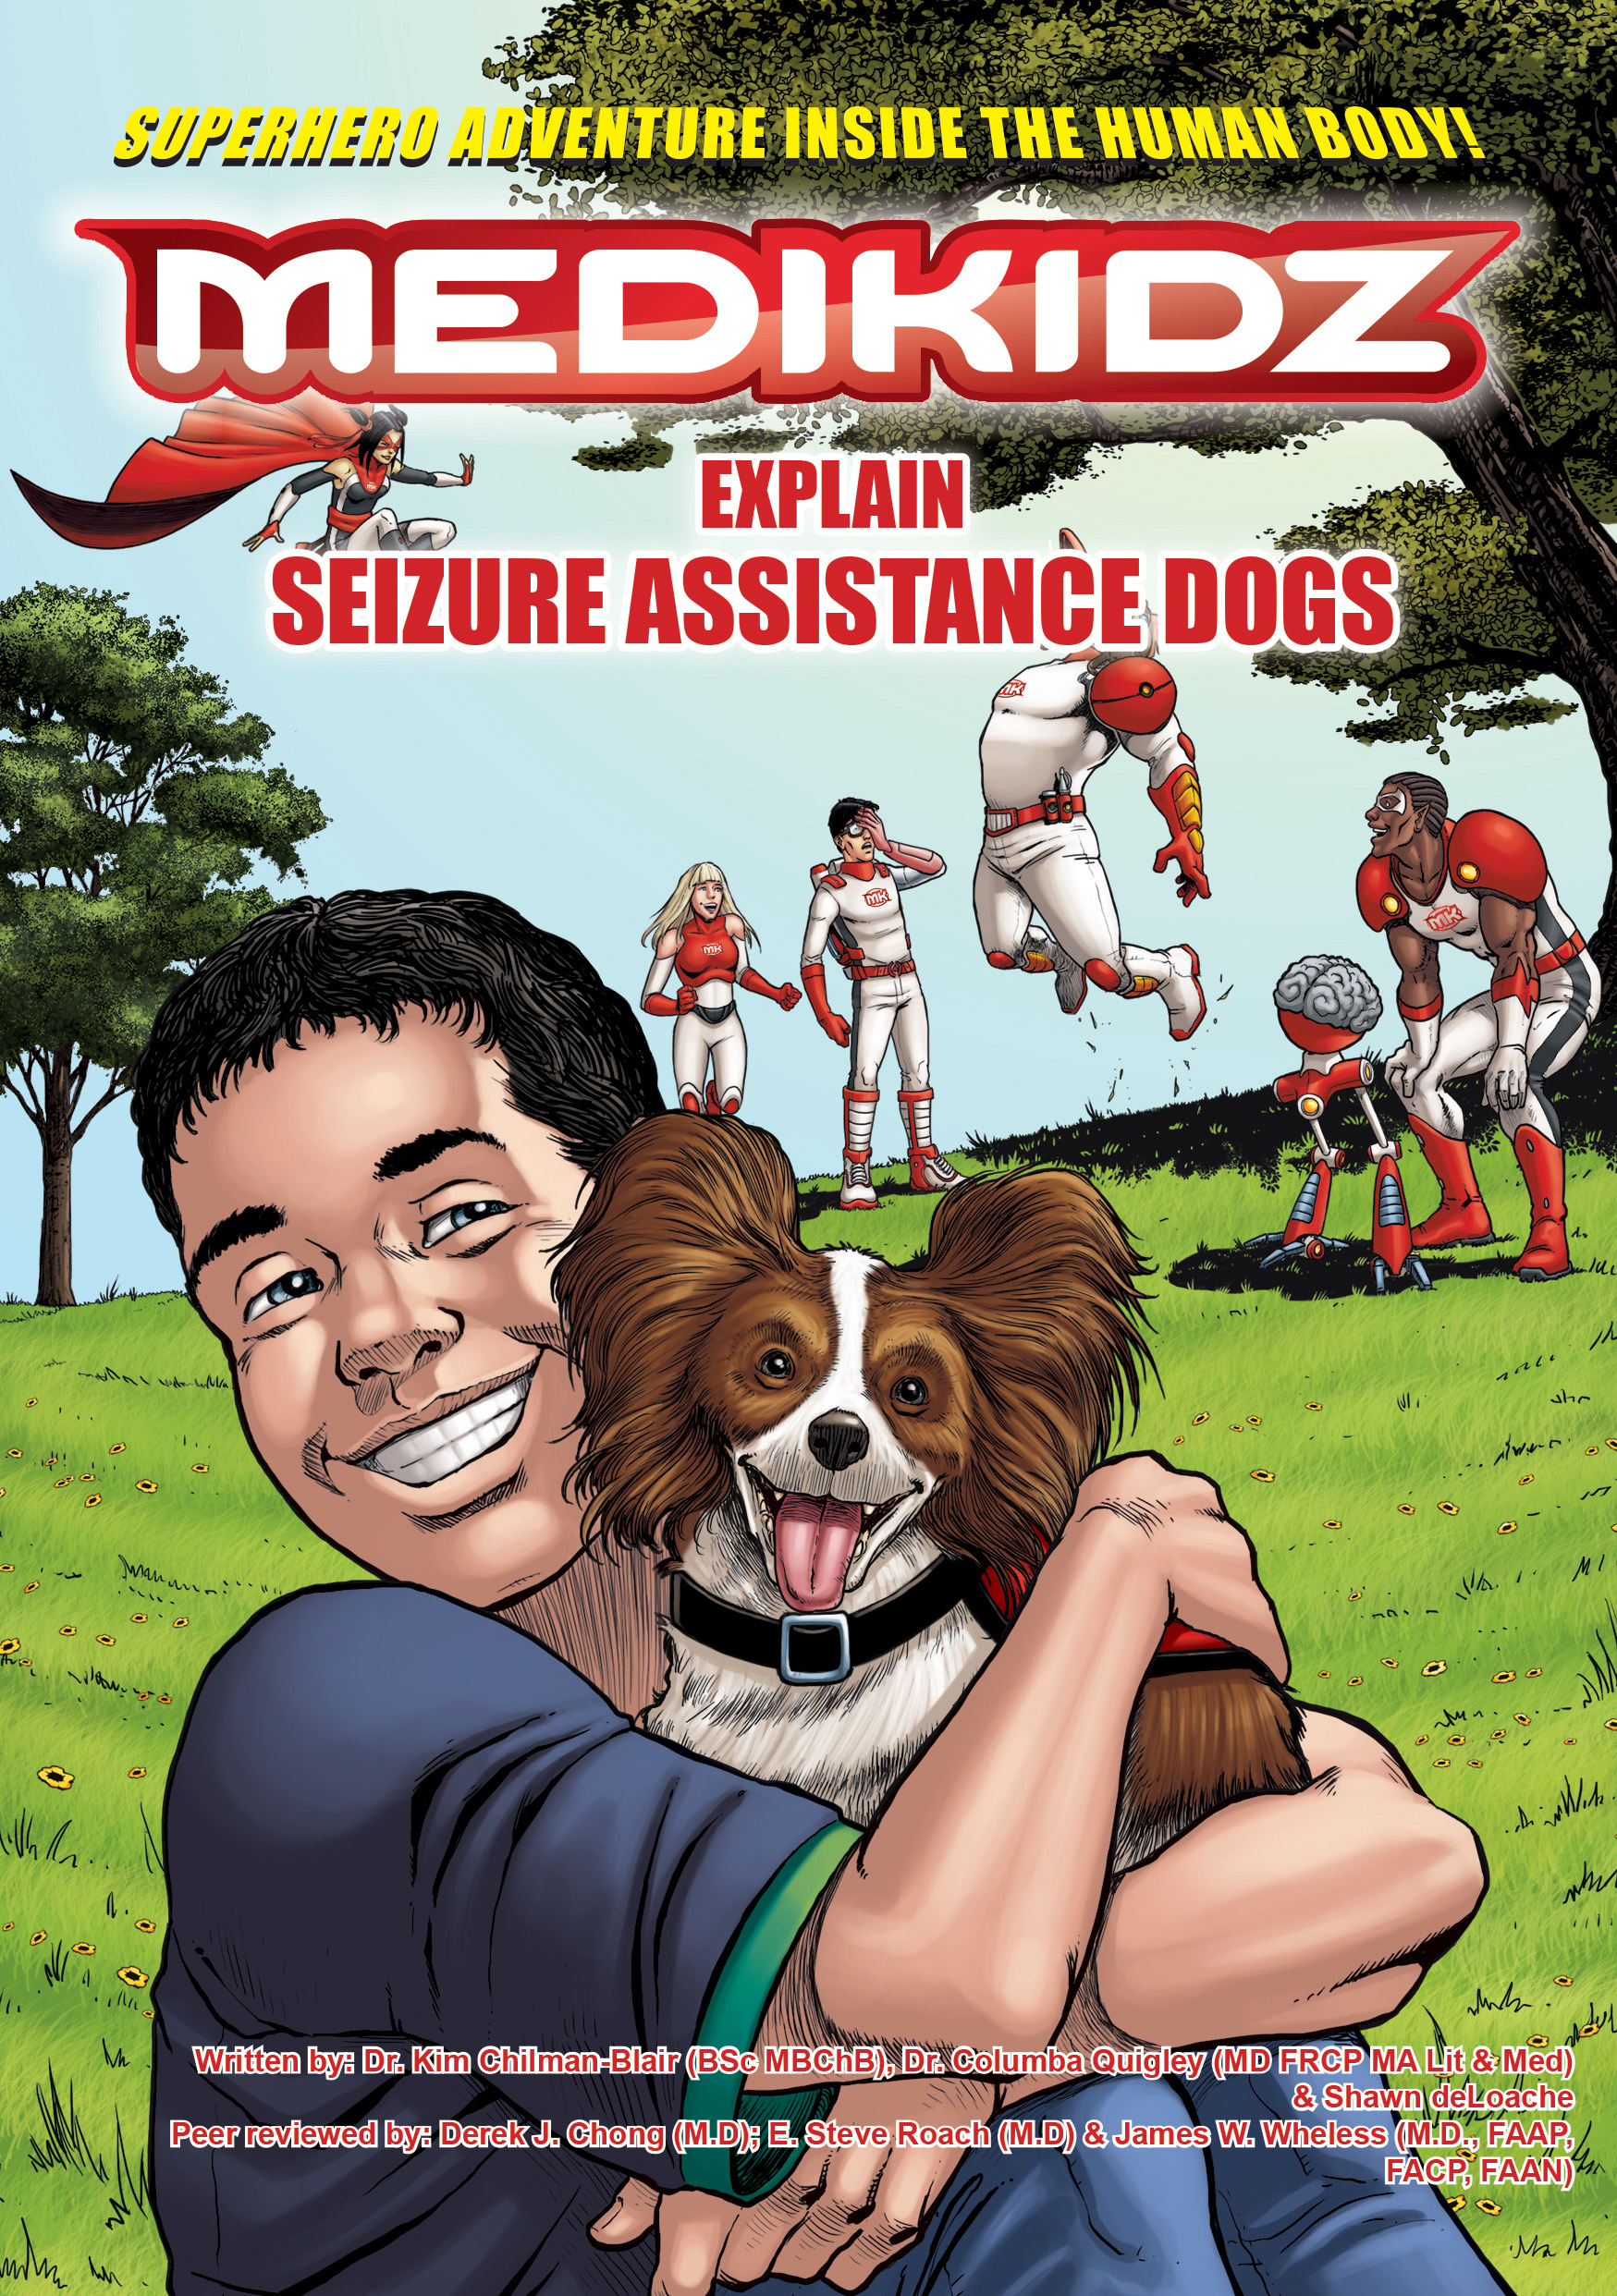 "Medikidz Explain Seizure Assistance Dogs” is the second book in the “Medikidz Explain Epilepsy” comic book series, designed to educate children about epilepsy.